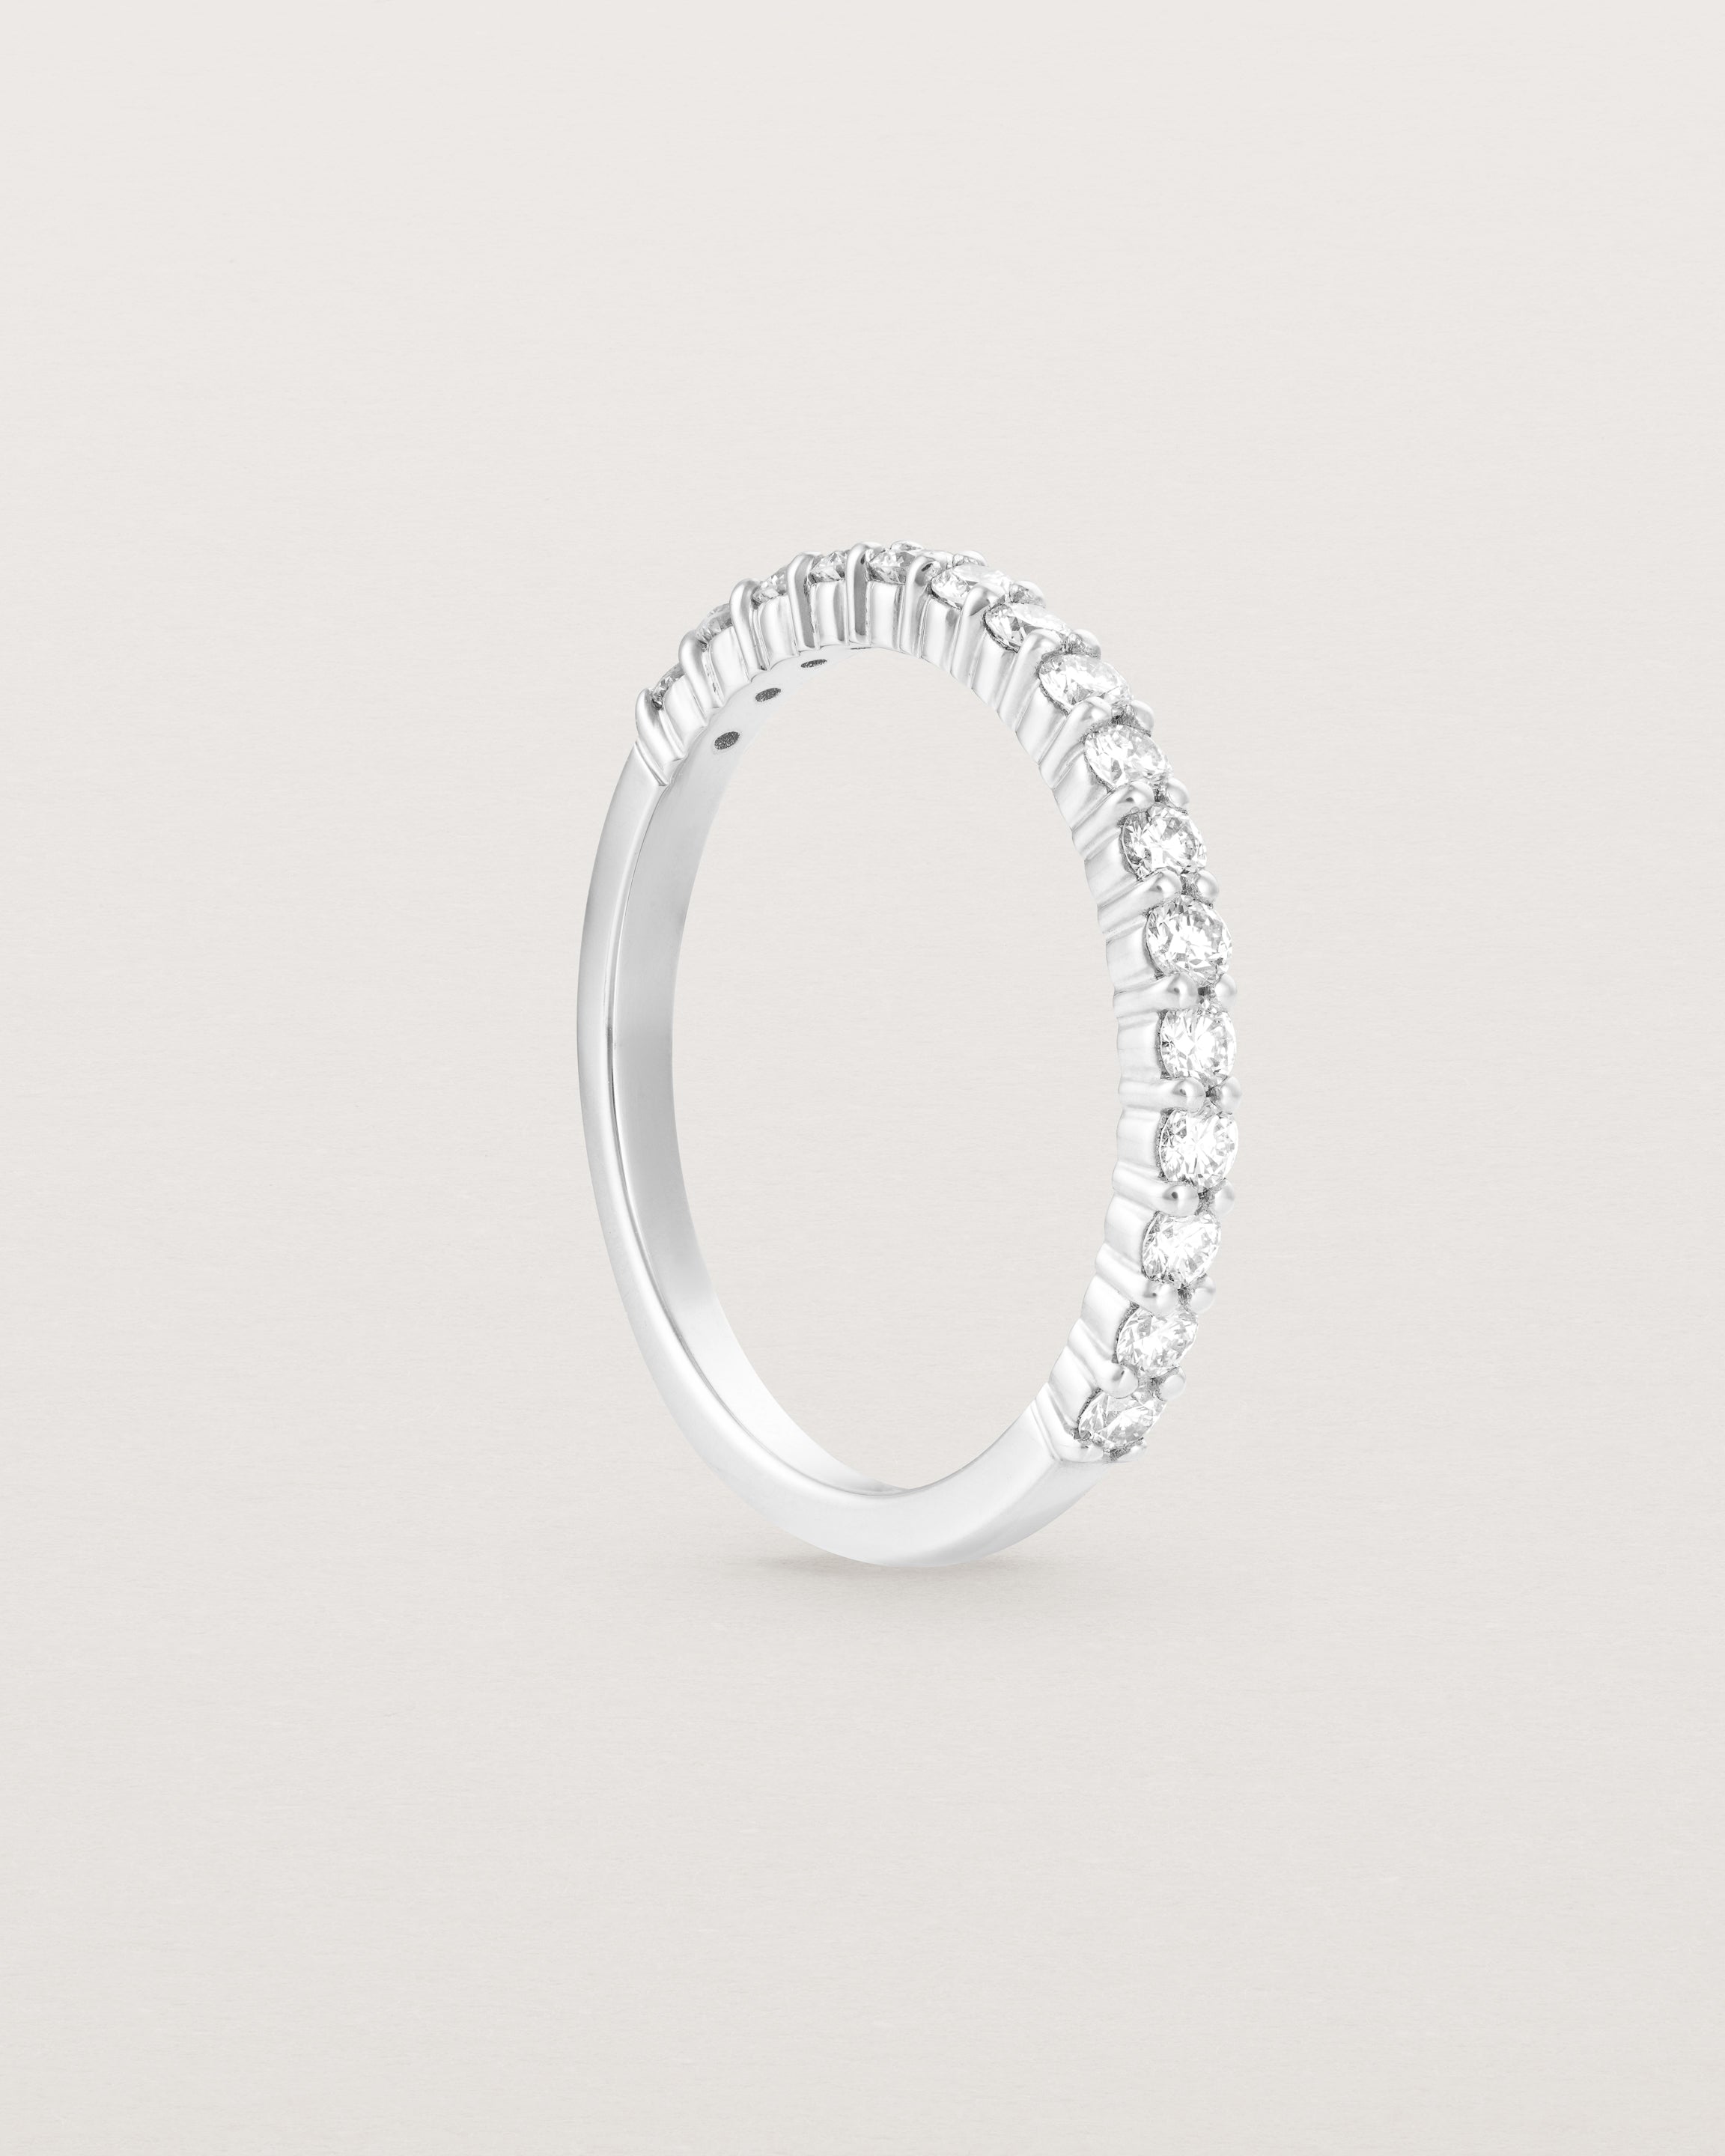 Standing view of the Demi Grace Ring | White Diamonds in white gold.